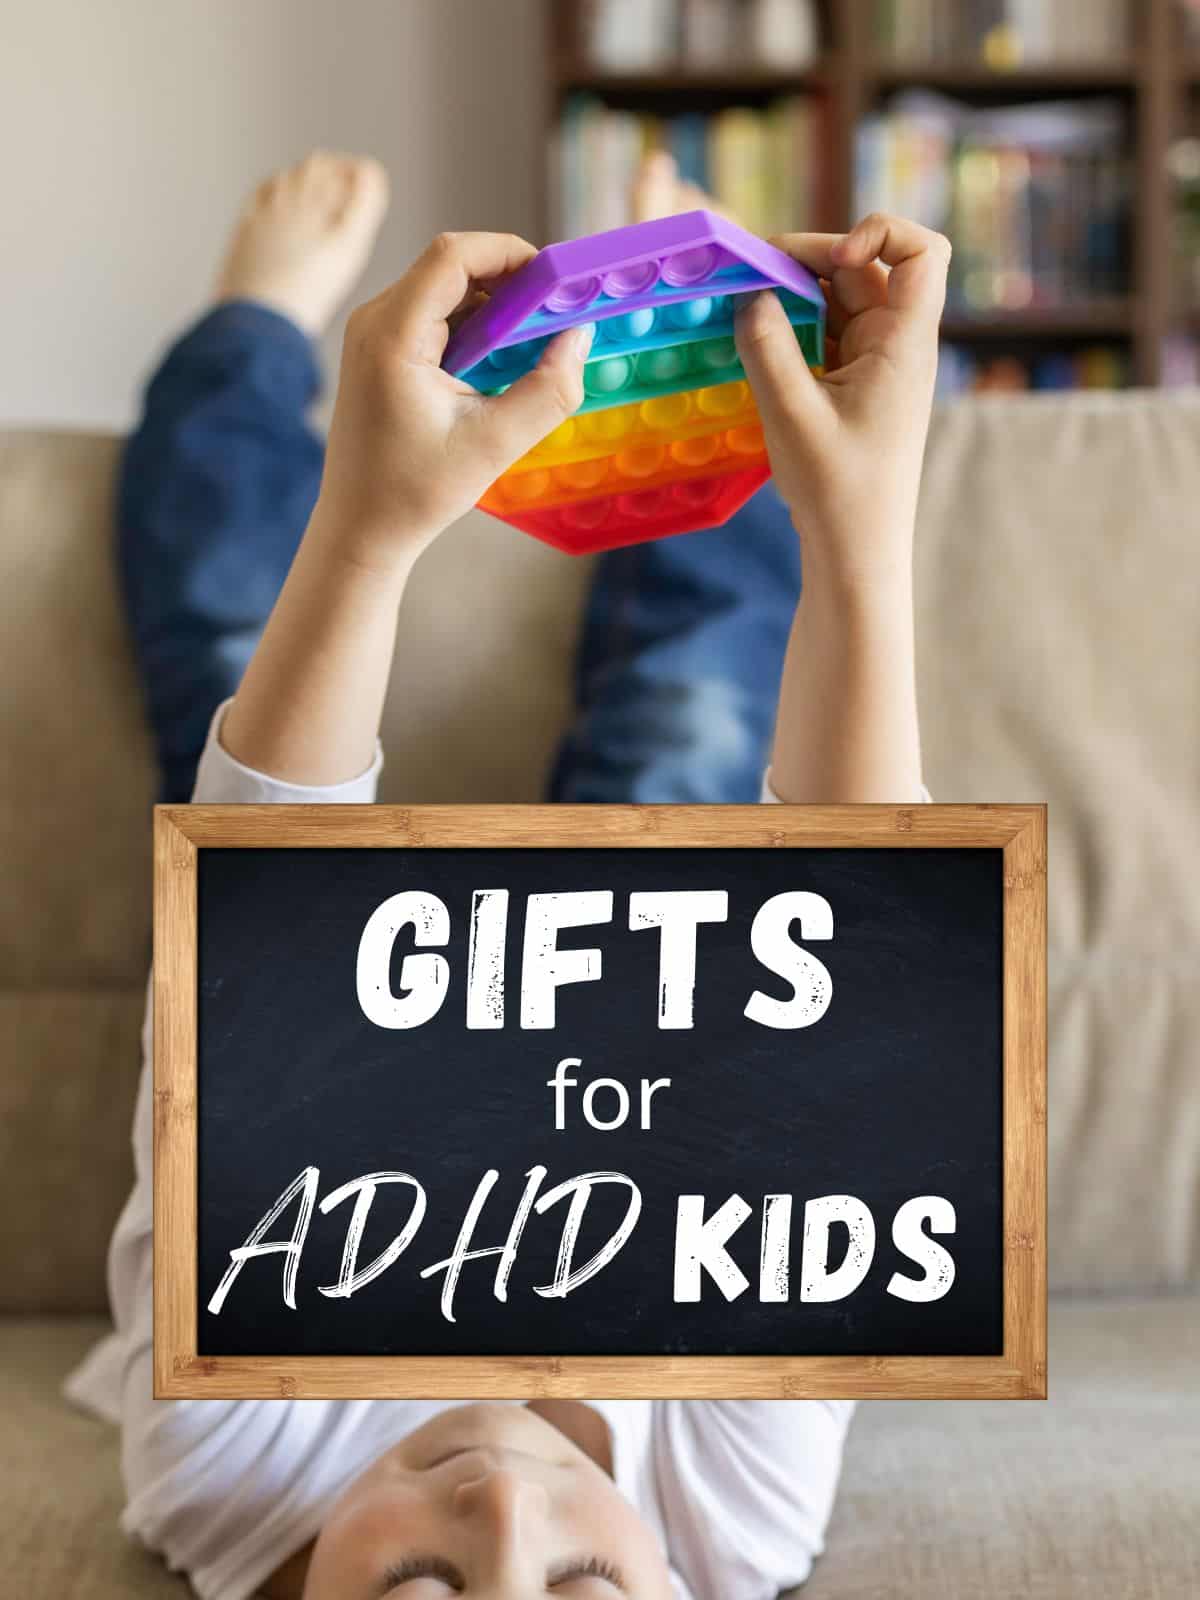 A child on a sofa with his feet in the air holding a colorful fidget toy and the text "gifts for ADHD kid."